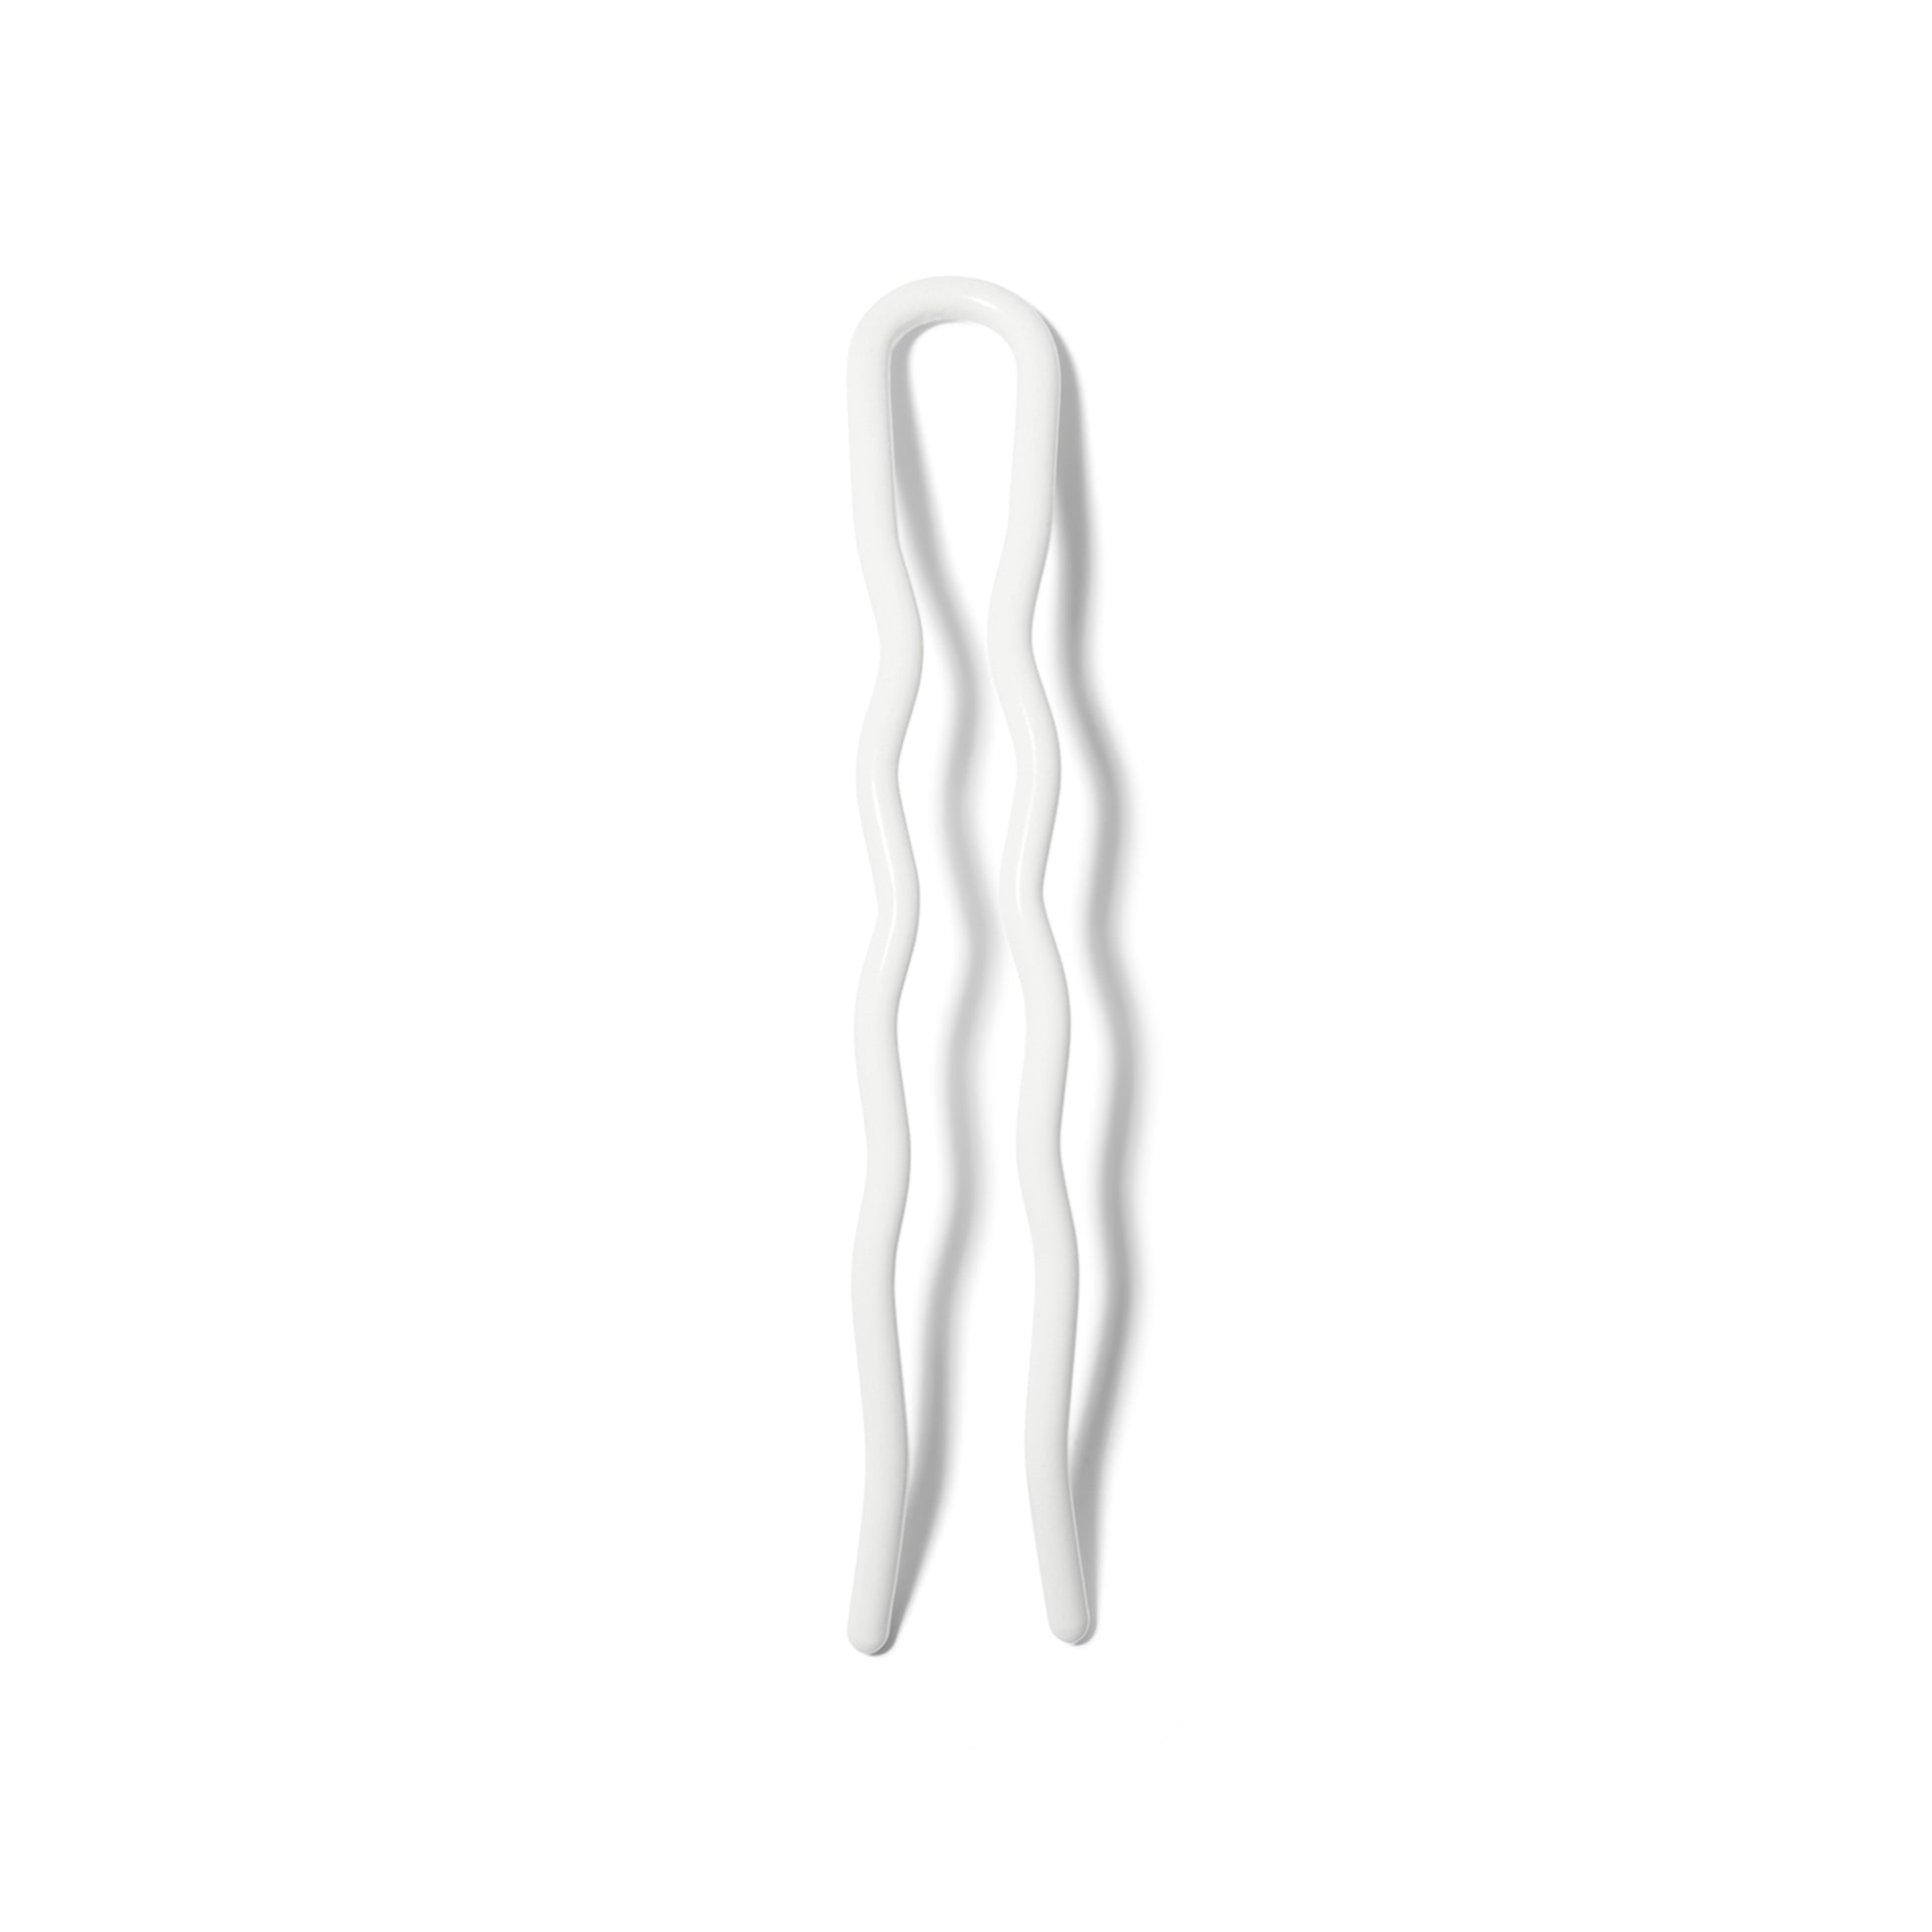 The Reed Clarke 4" Hair Pin with a  white powder coated finish. The tines have soft waves in them for grip.